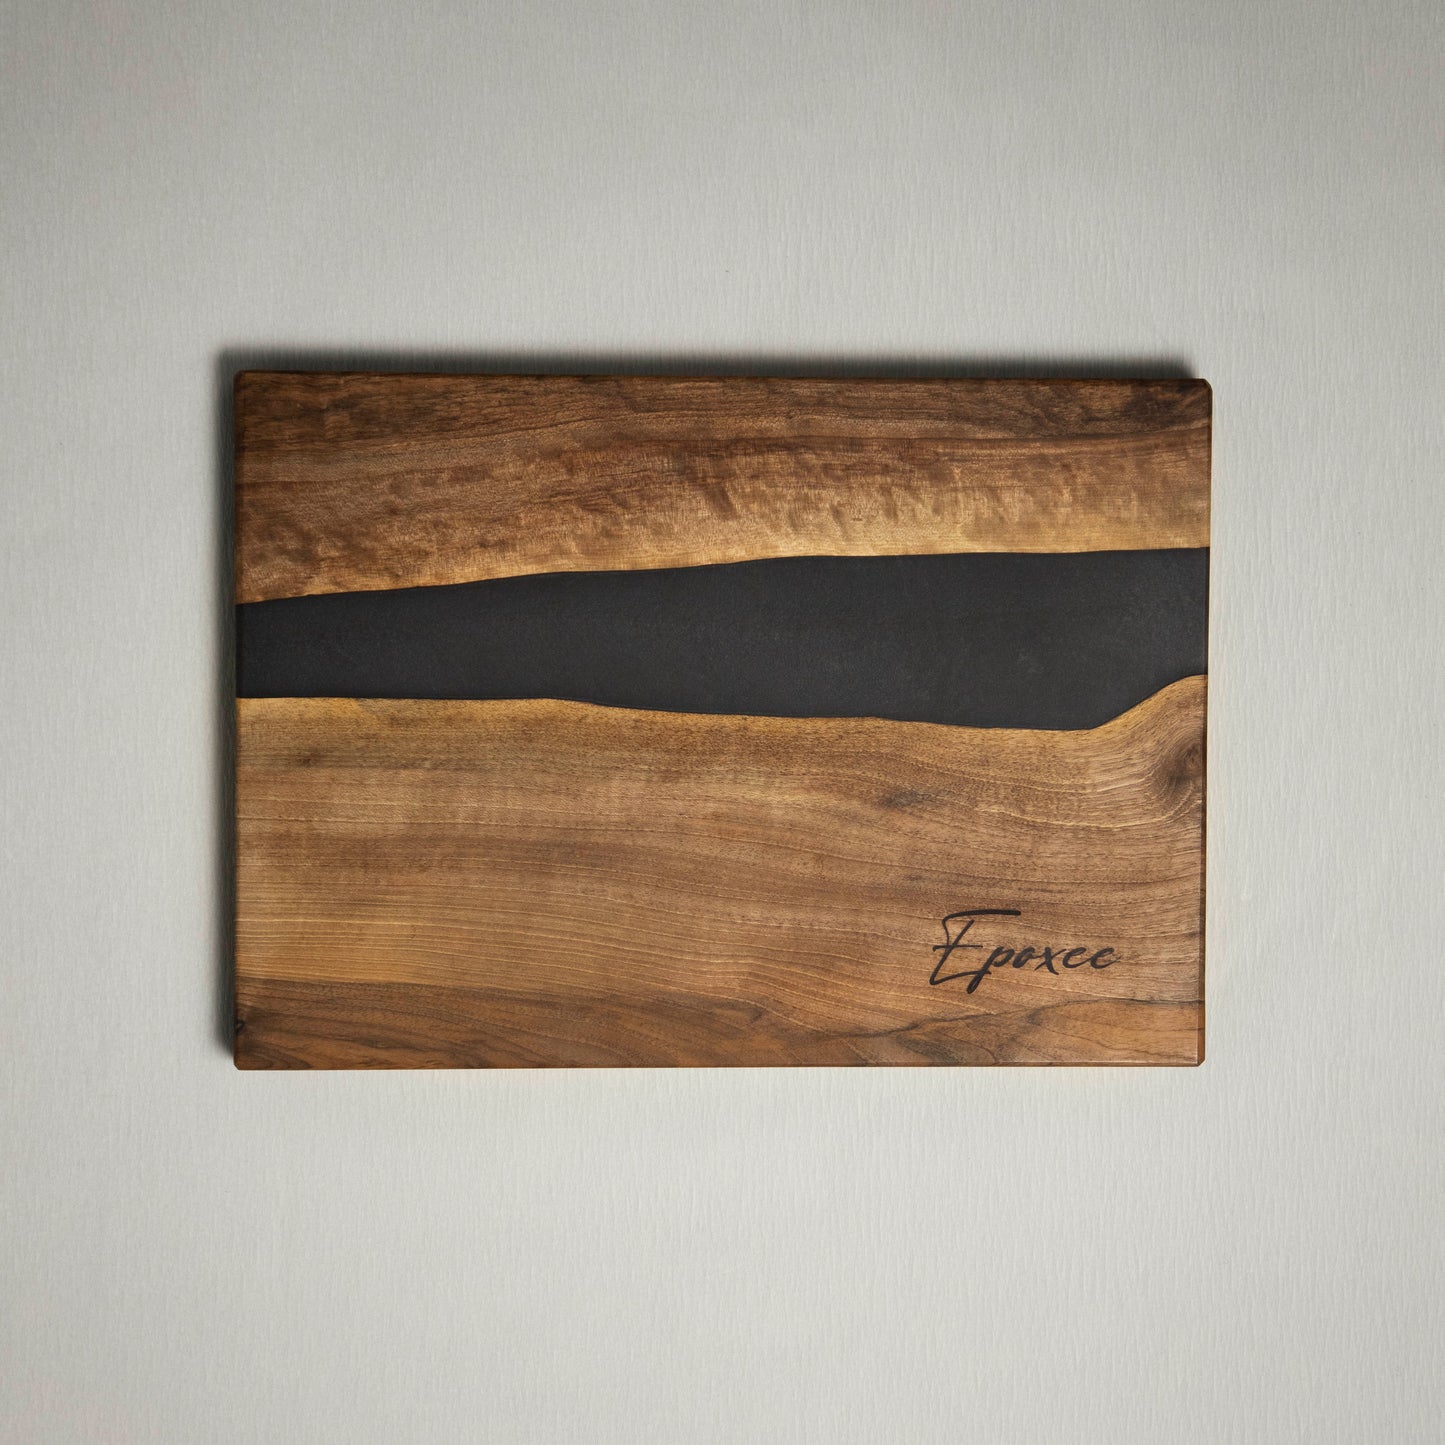 Serving board made from wood and epoxy resin in the color gun powder